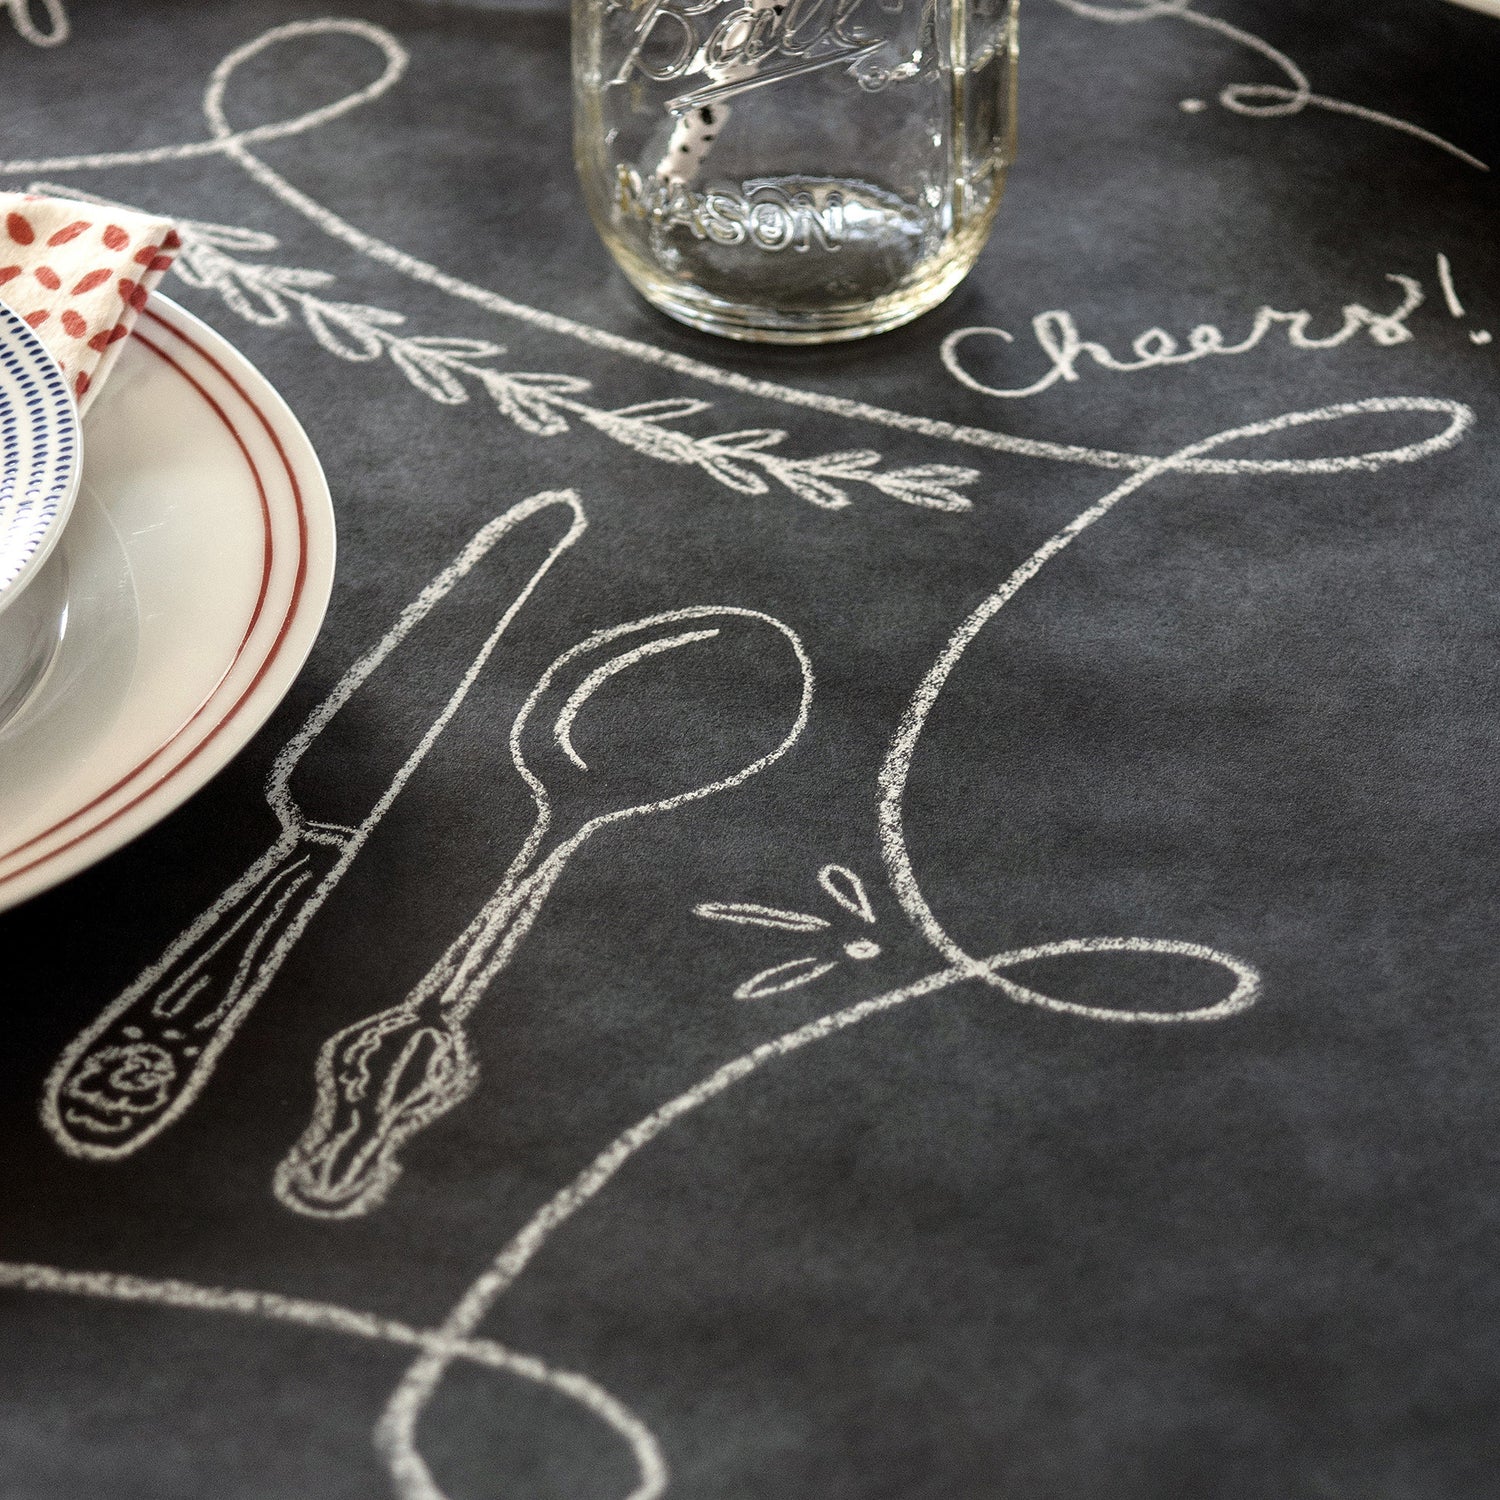 Close up of an elegant place setting on top of the Chalkboard Runner, showing hand-drawn embellishments around each plate.